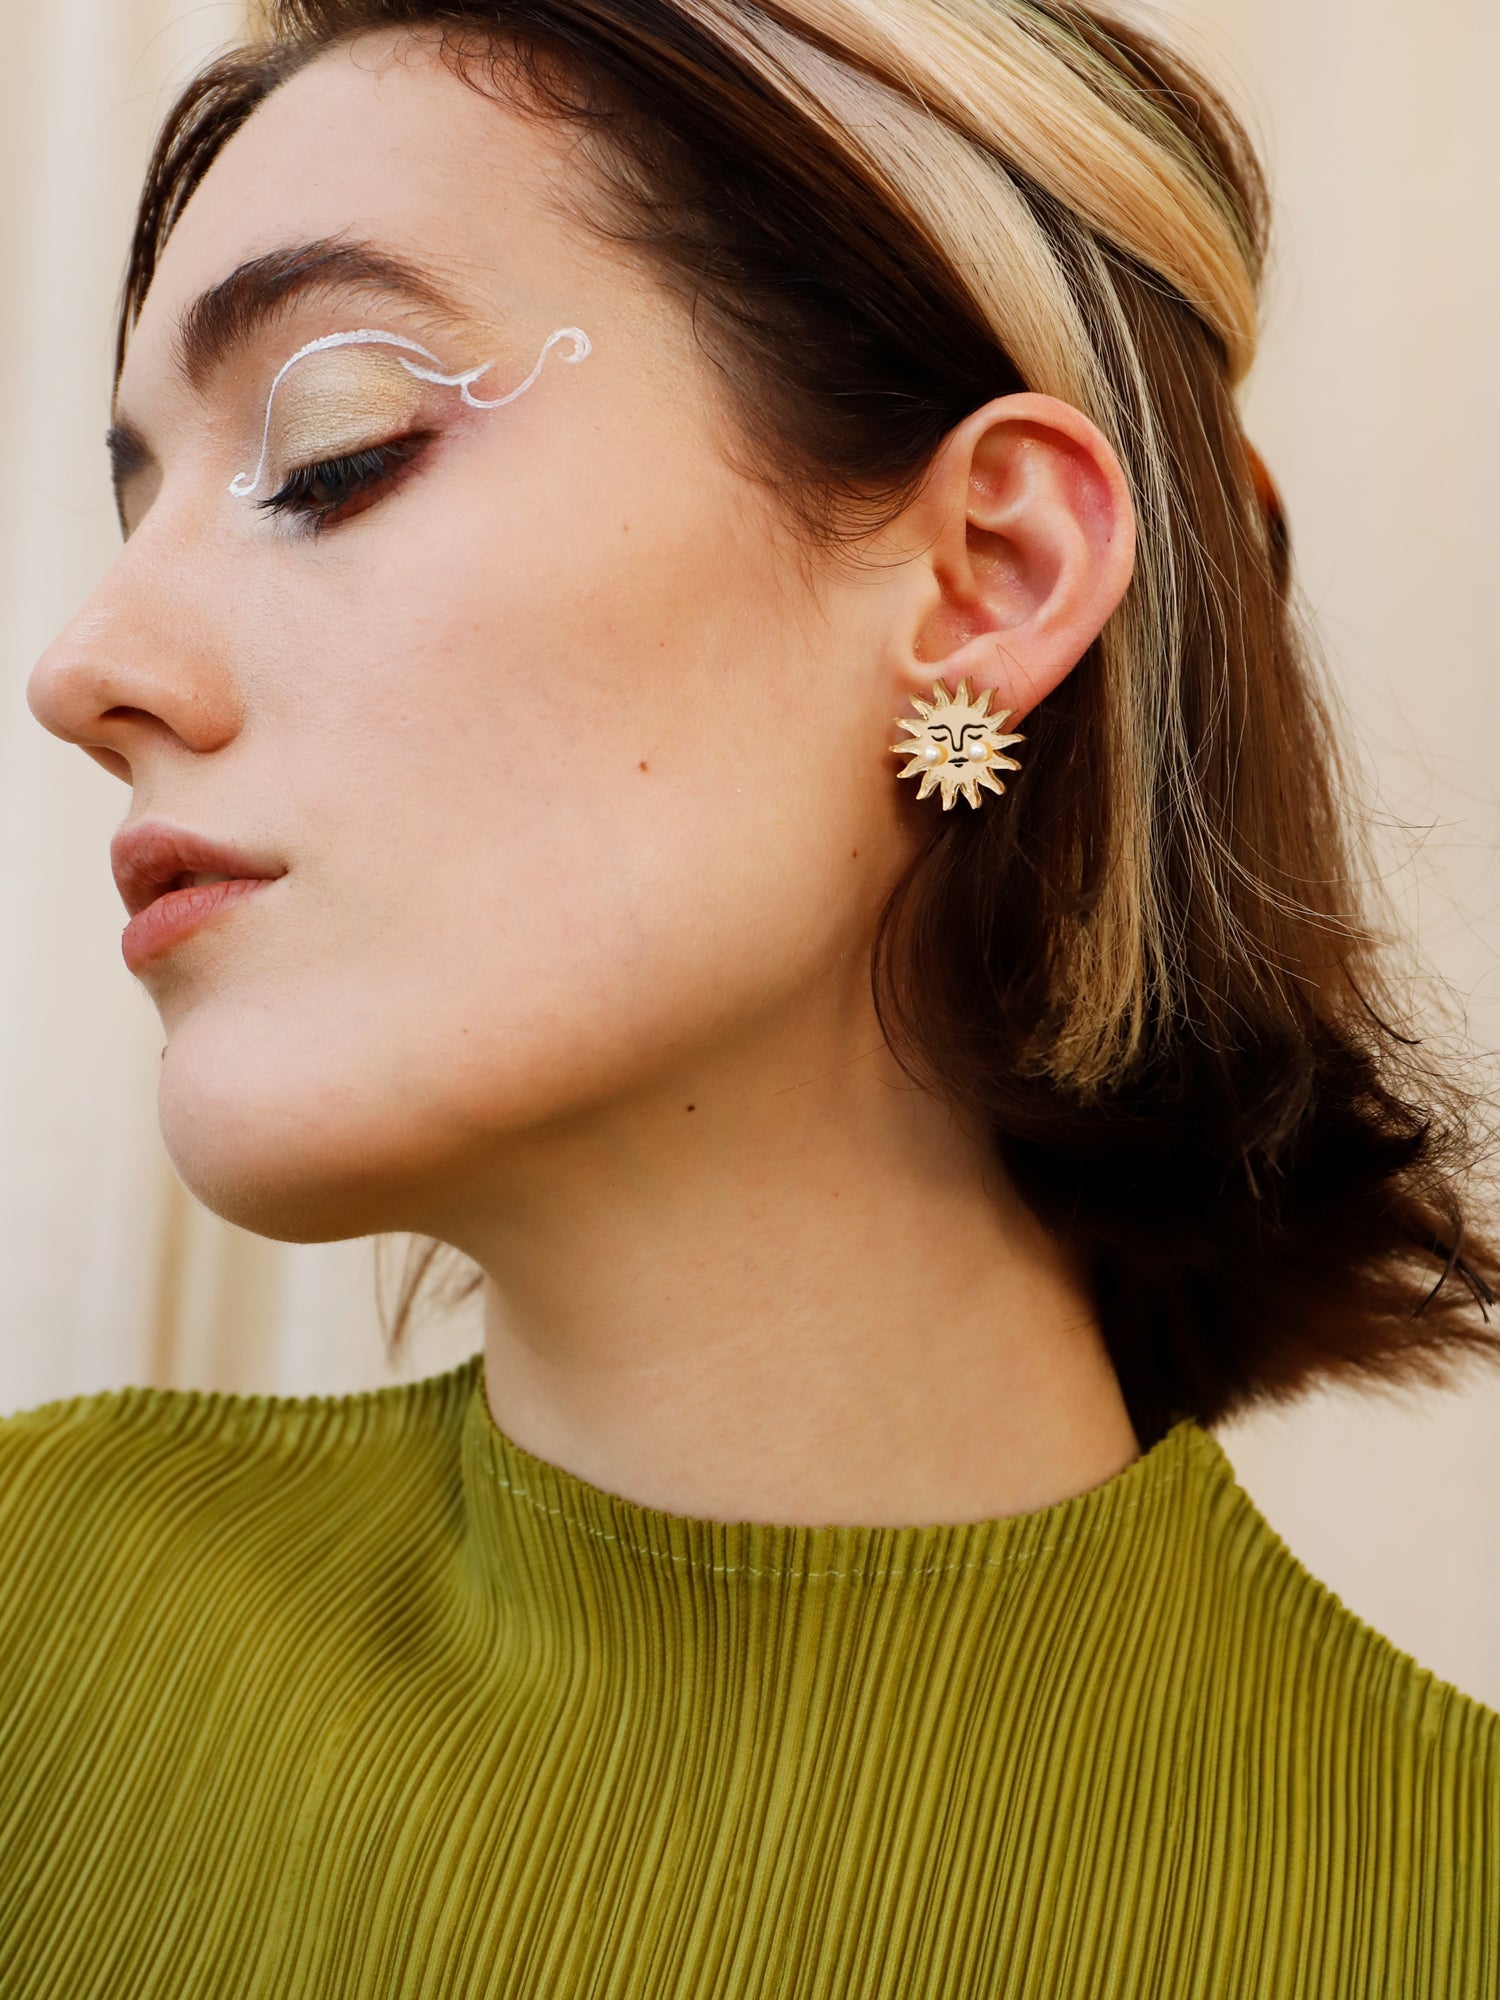 Sun Studs. Earrings made with laser cut acrylic, Czech glass pearls and hand inked details. Handmade in the UK by Wolf & Moon.